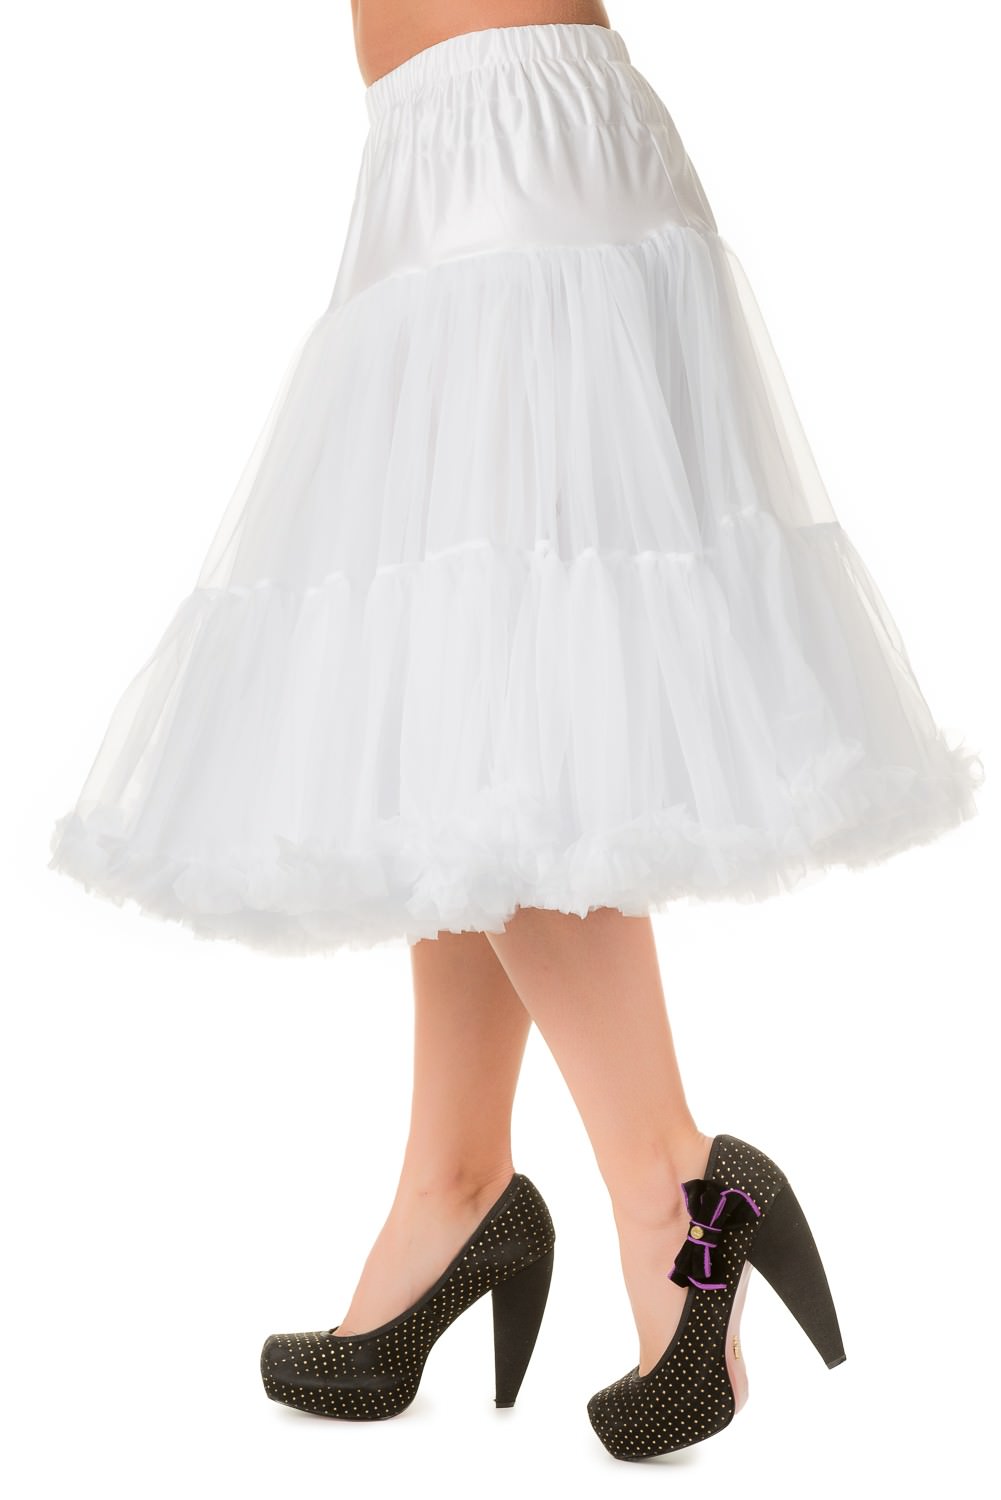 Dancing Days Lifeforms 50s Style 25"-27" Long Petticoat In White; Dancing Days; Lifeforms Petticoat; 50s Style; 25"-27" Long Petticoat; White; Side View